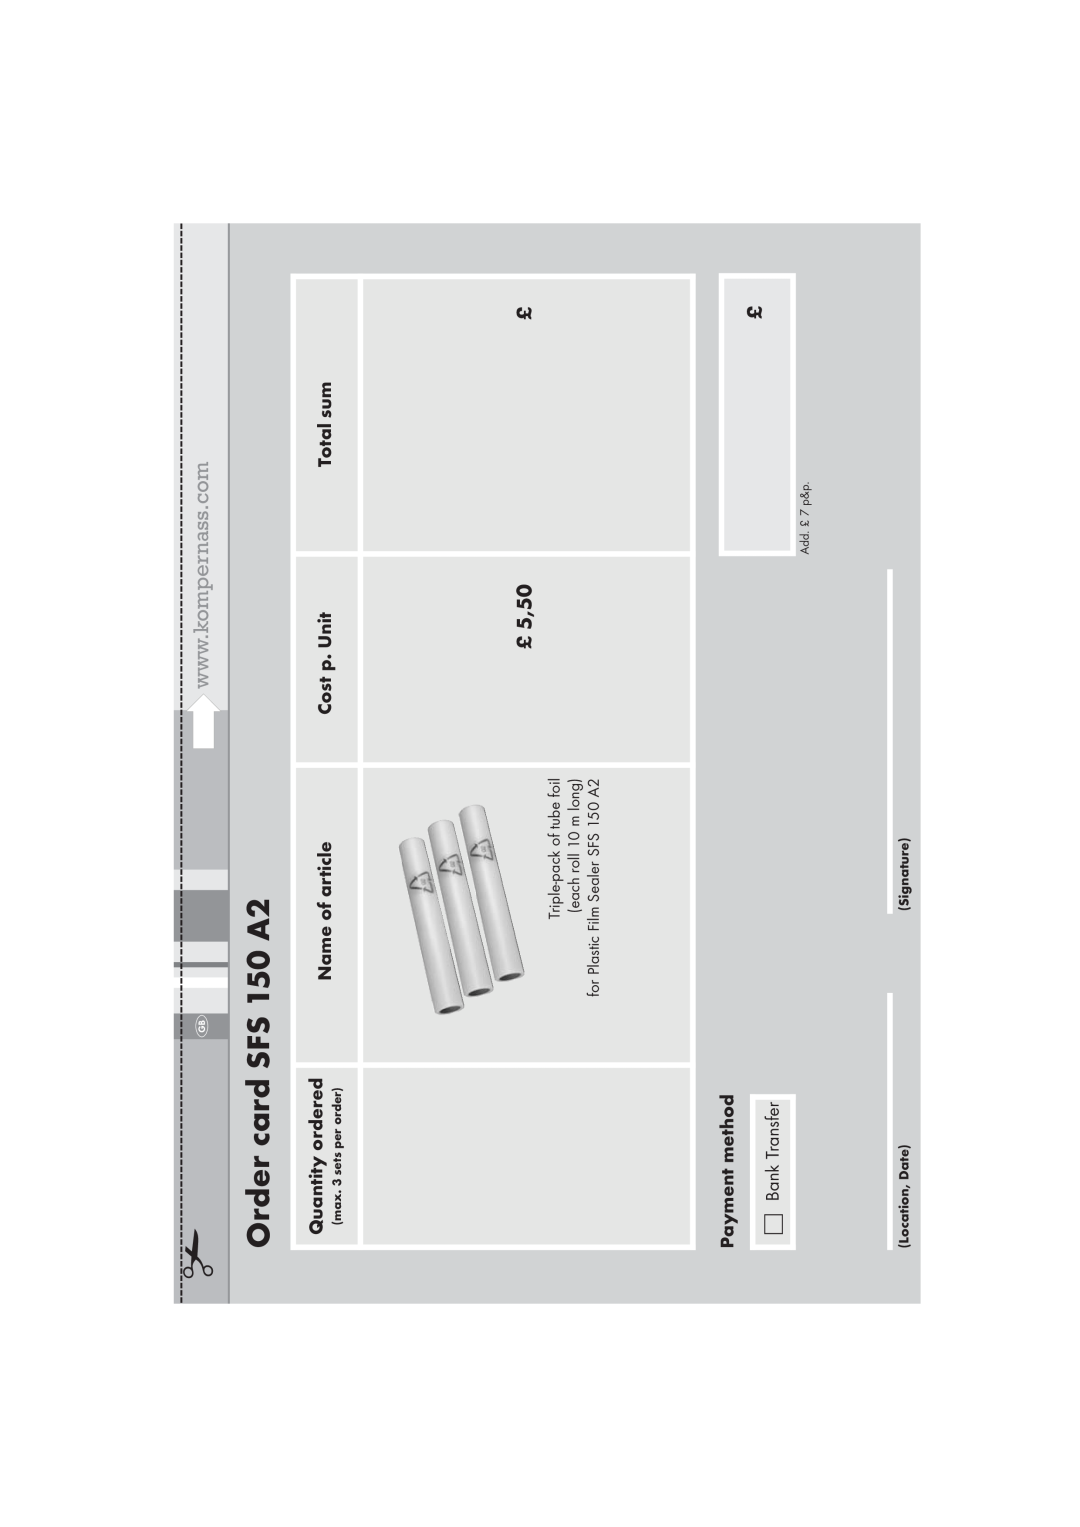 Silvercrest Order card SFS 150 A2, Quantity ordered, Name of article, Cost p. Unit, Total sum, max. 3 sets per order 